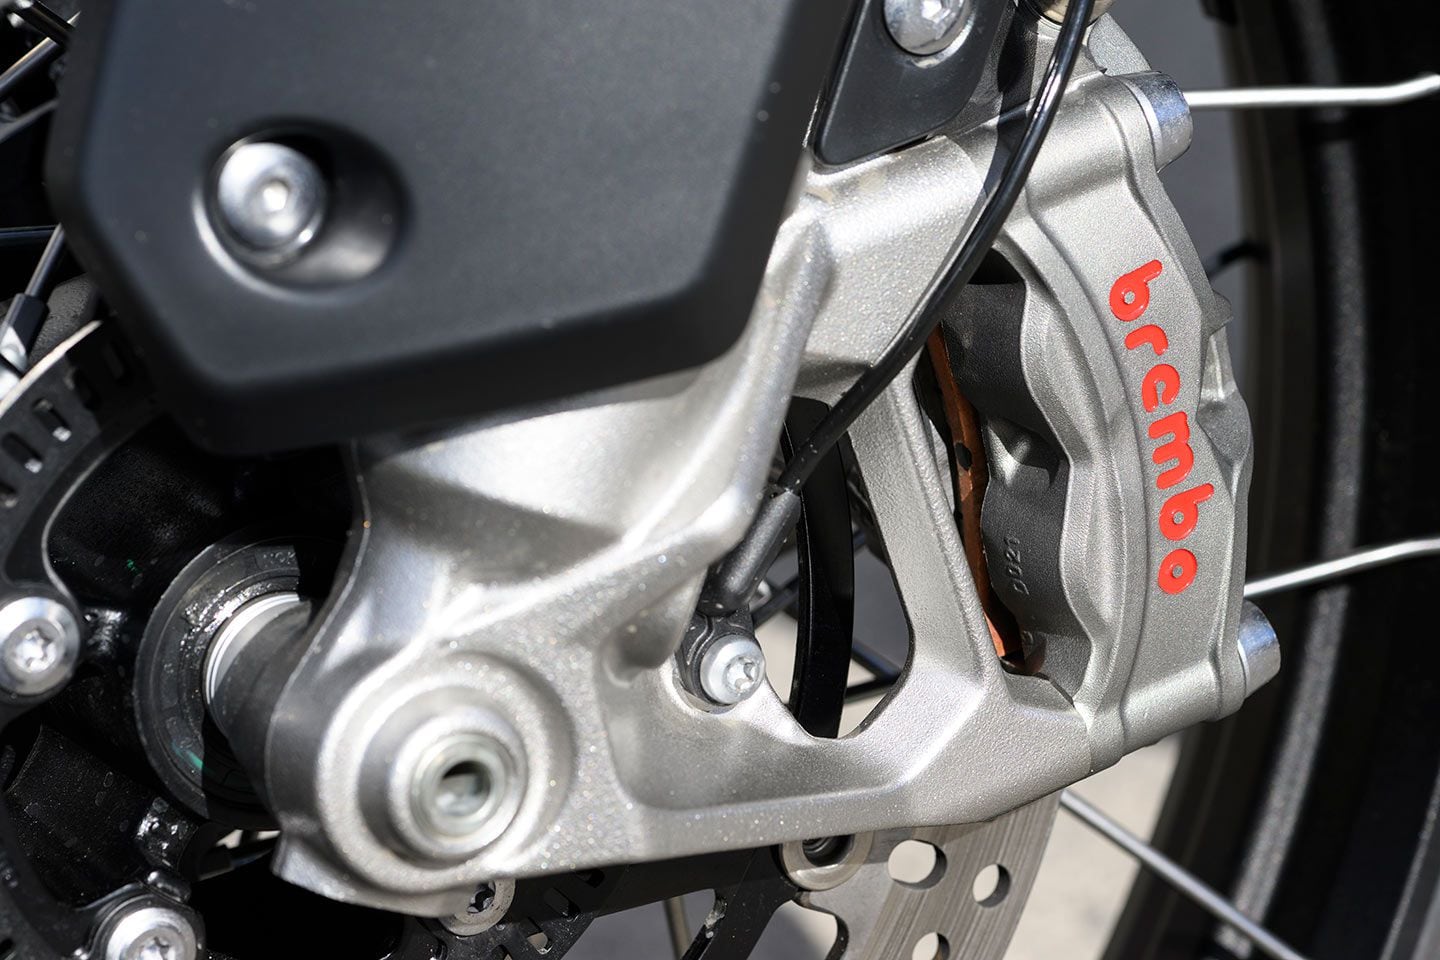 Brembo M4.30 Stylema calipers are excellent and cornering ABS is optimized for each ride mode. Off-Road mode turns off rear ABS. Off-Road Pro, available on Rally versions, shuts off ABS on both the front and rear. Excellent.